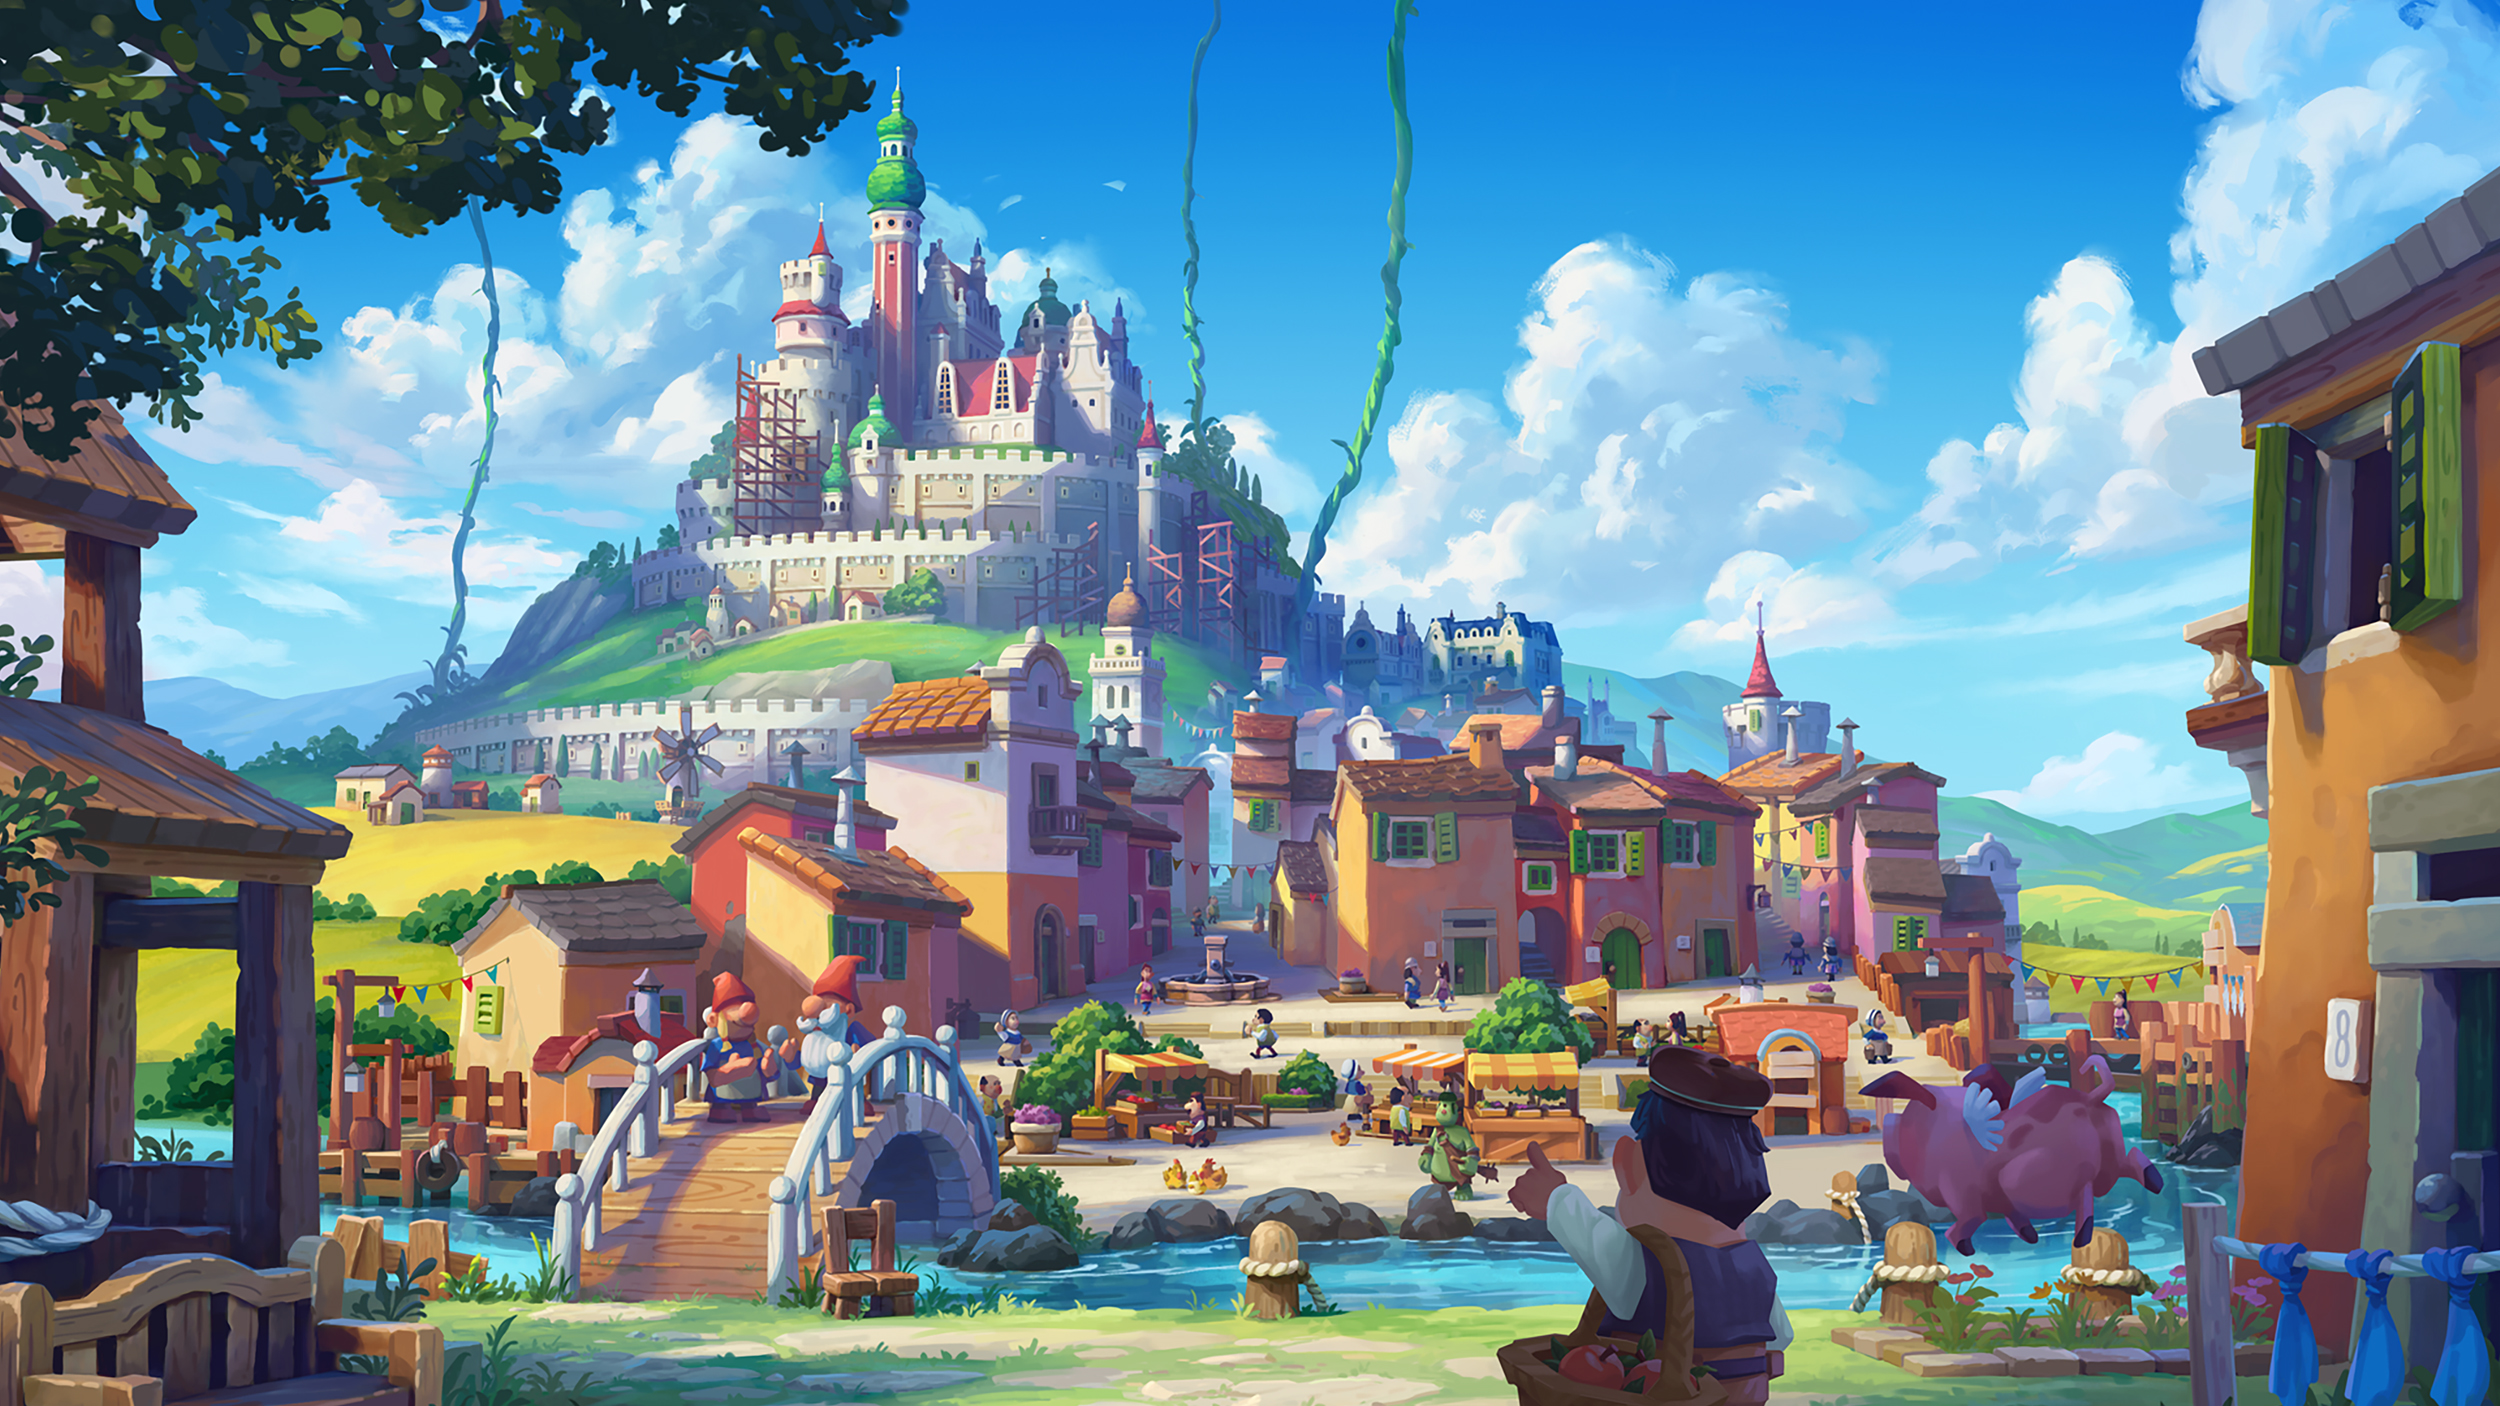 Don't sleep on this gorgeous fantasy city builder launching next month